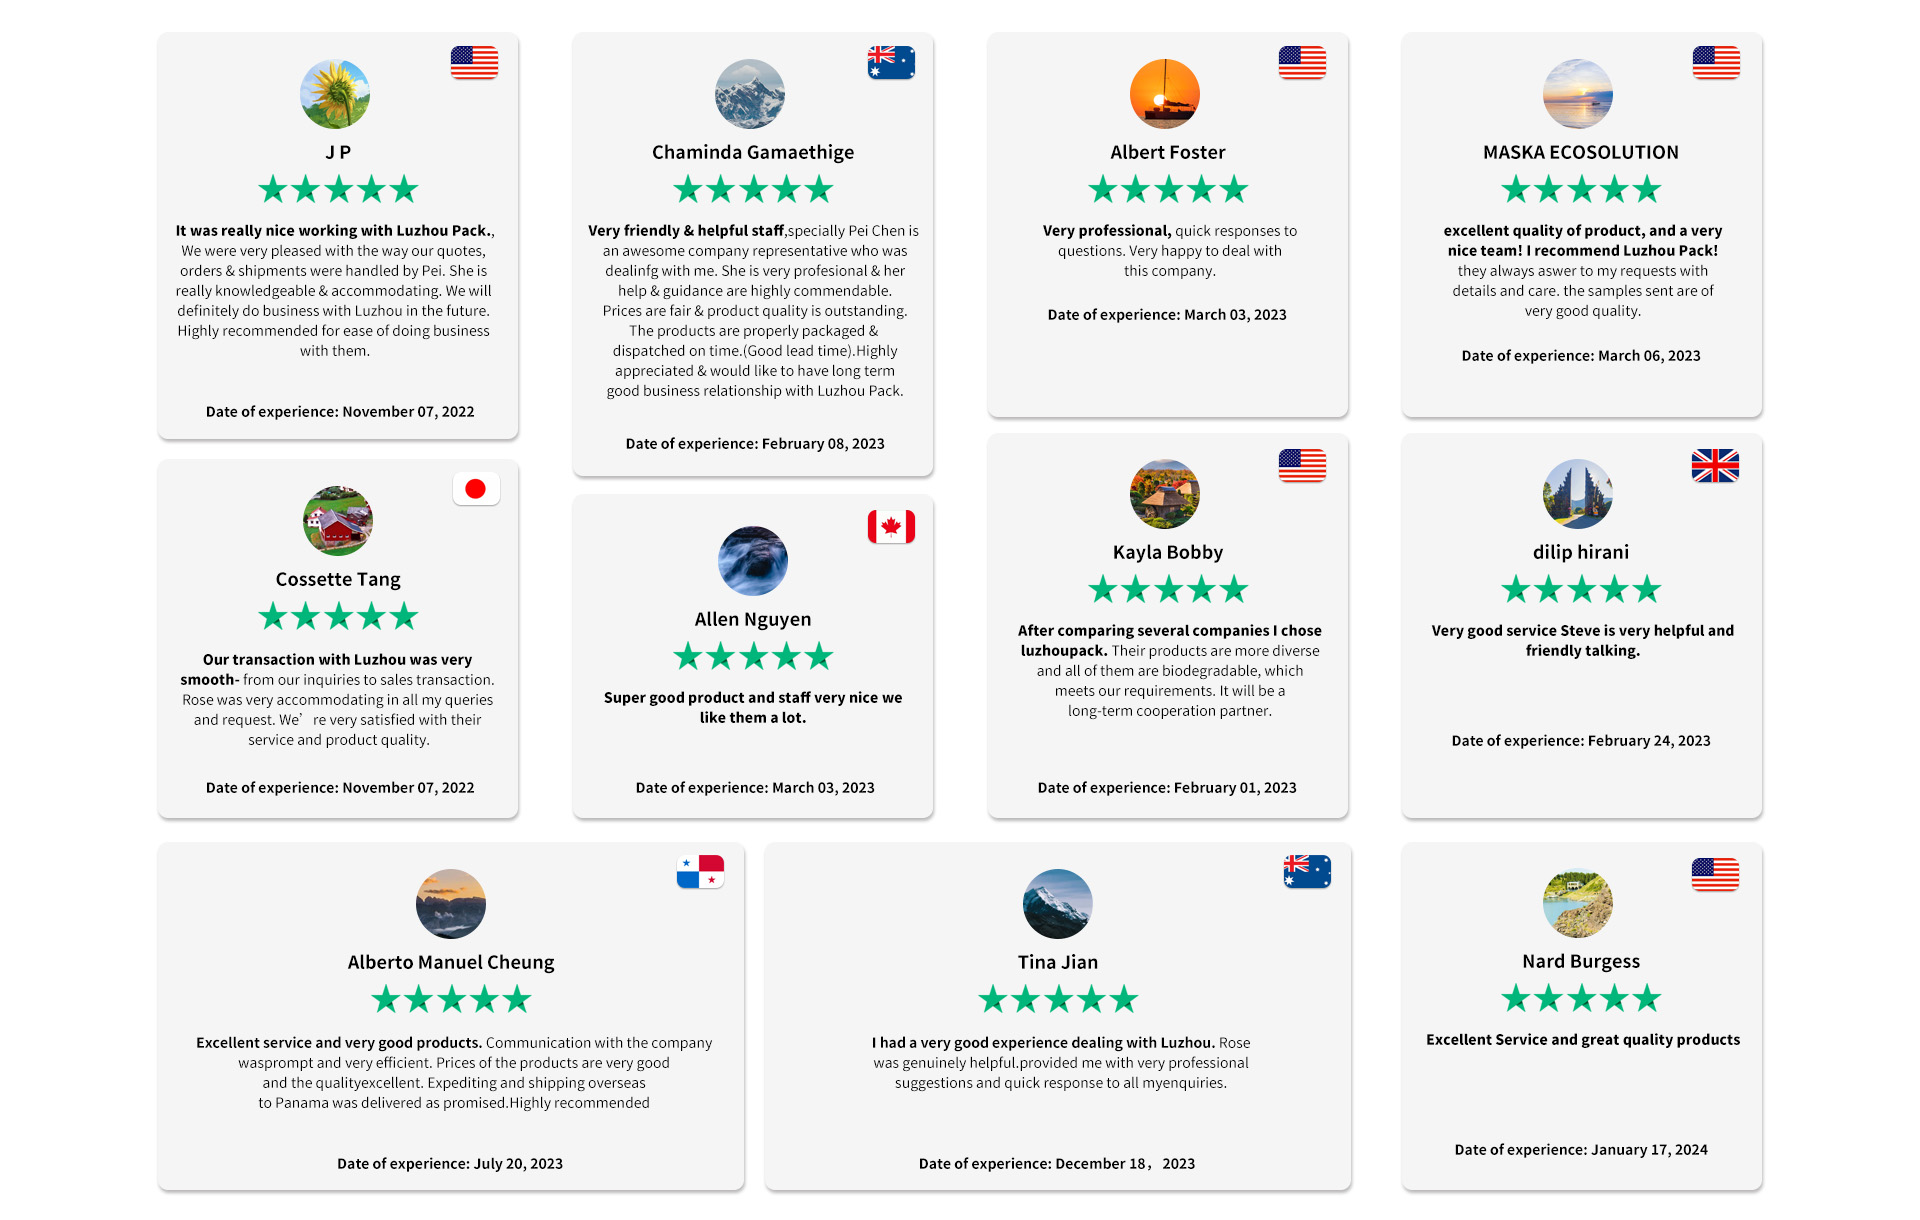 Customer reviews of our products and services on TrustPilot; they all express satisfaction